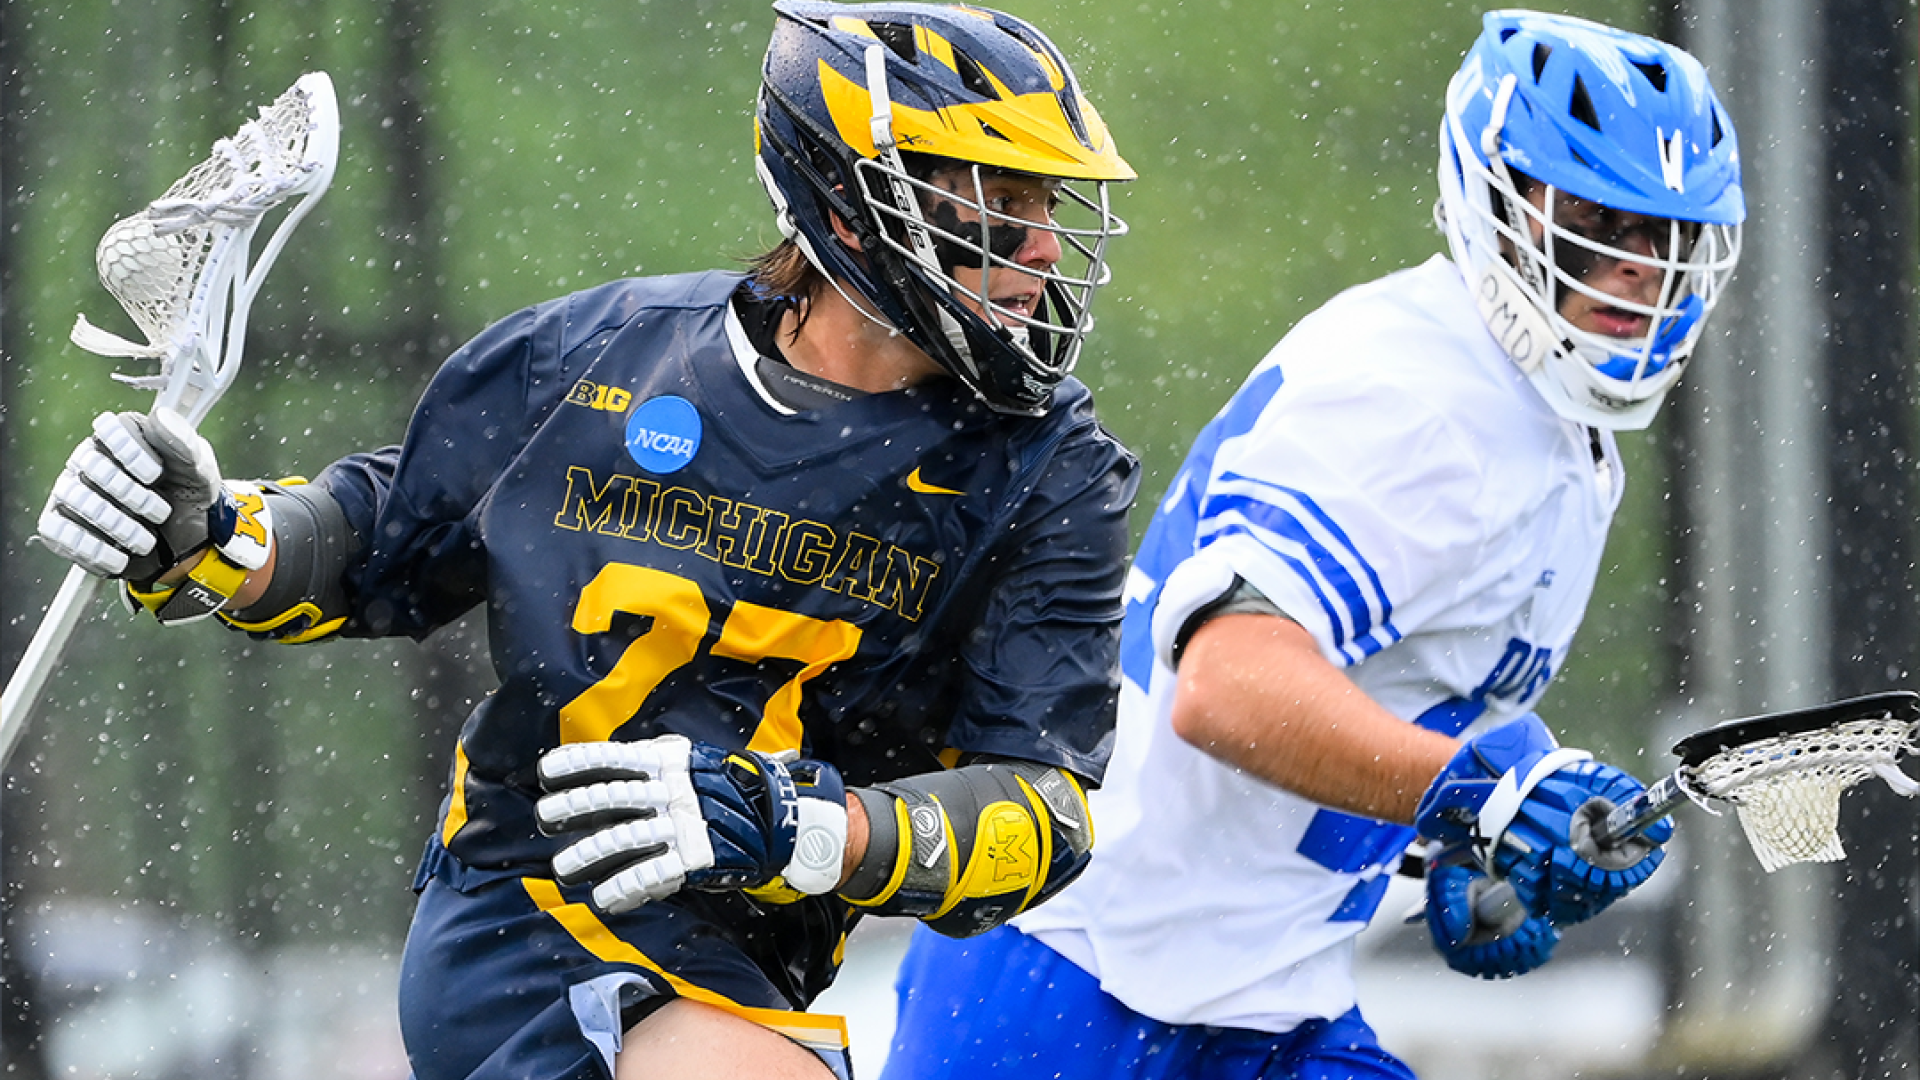 Ivy League Lacrosse 2023 Conference Preview - Lacrosse All Stars